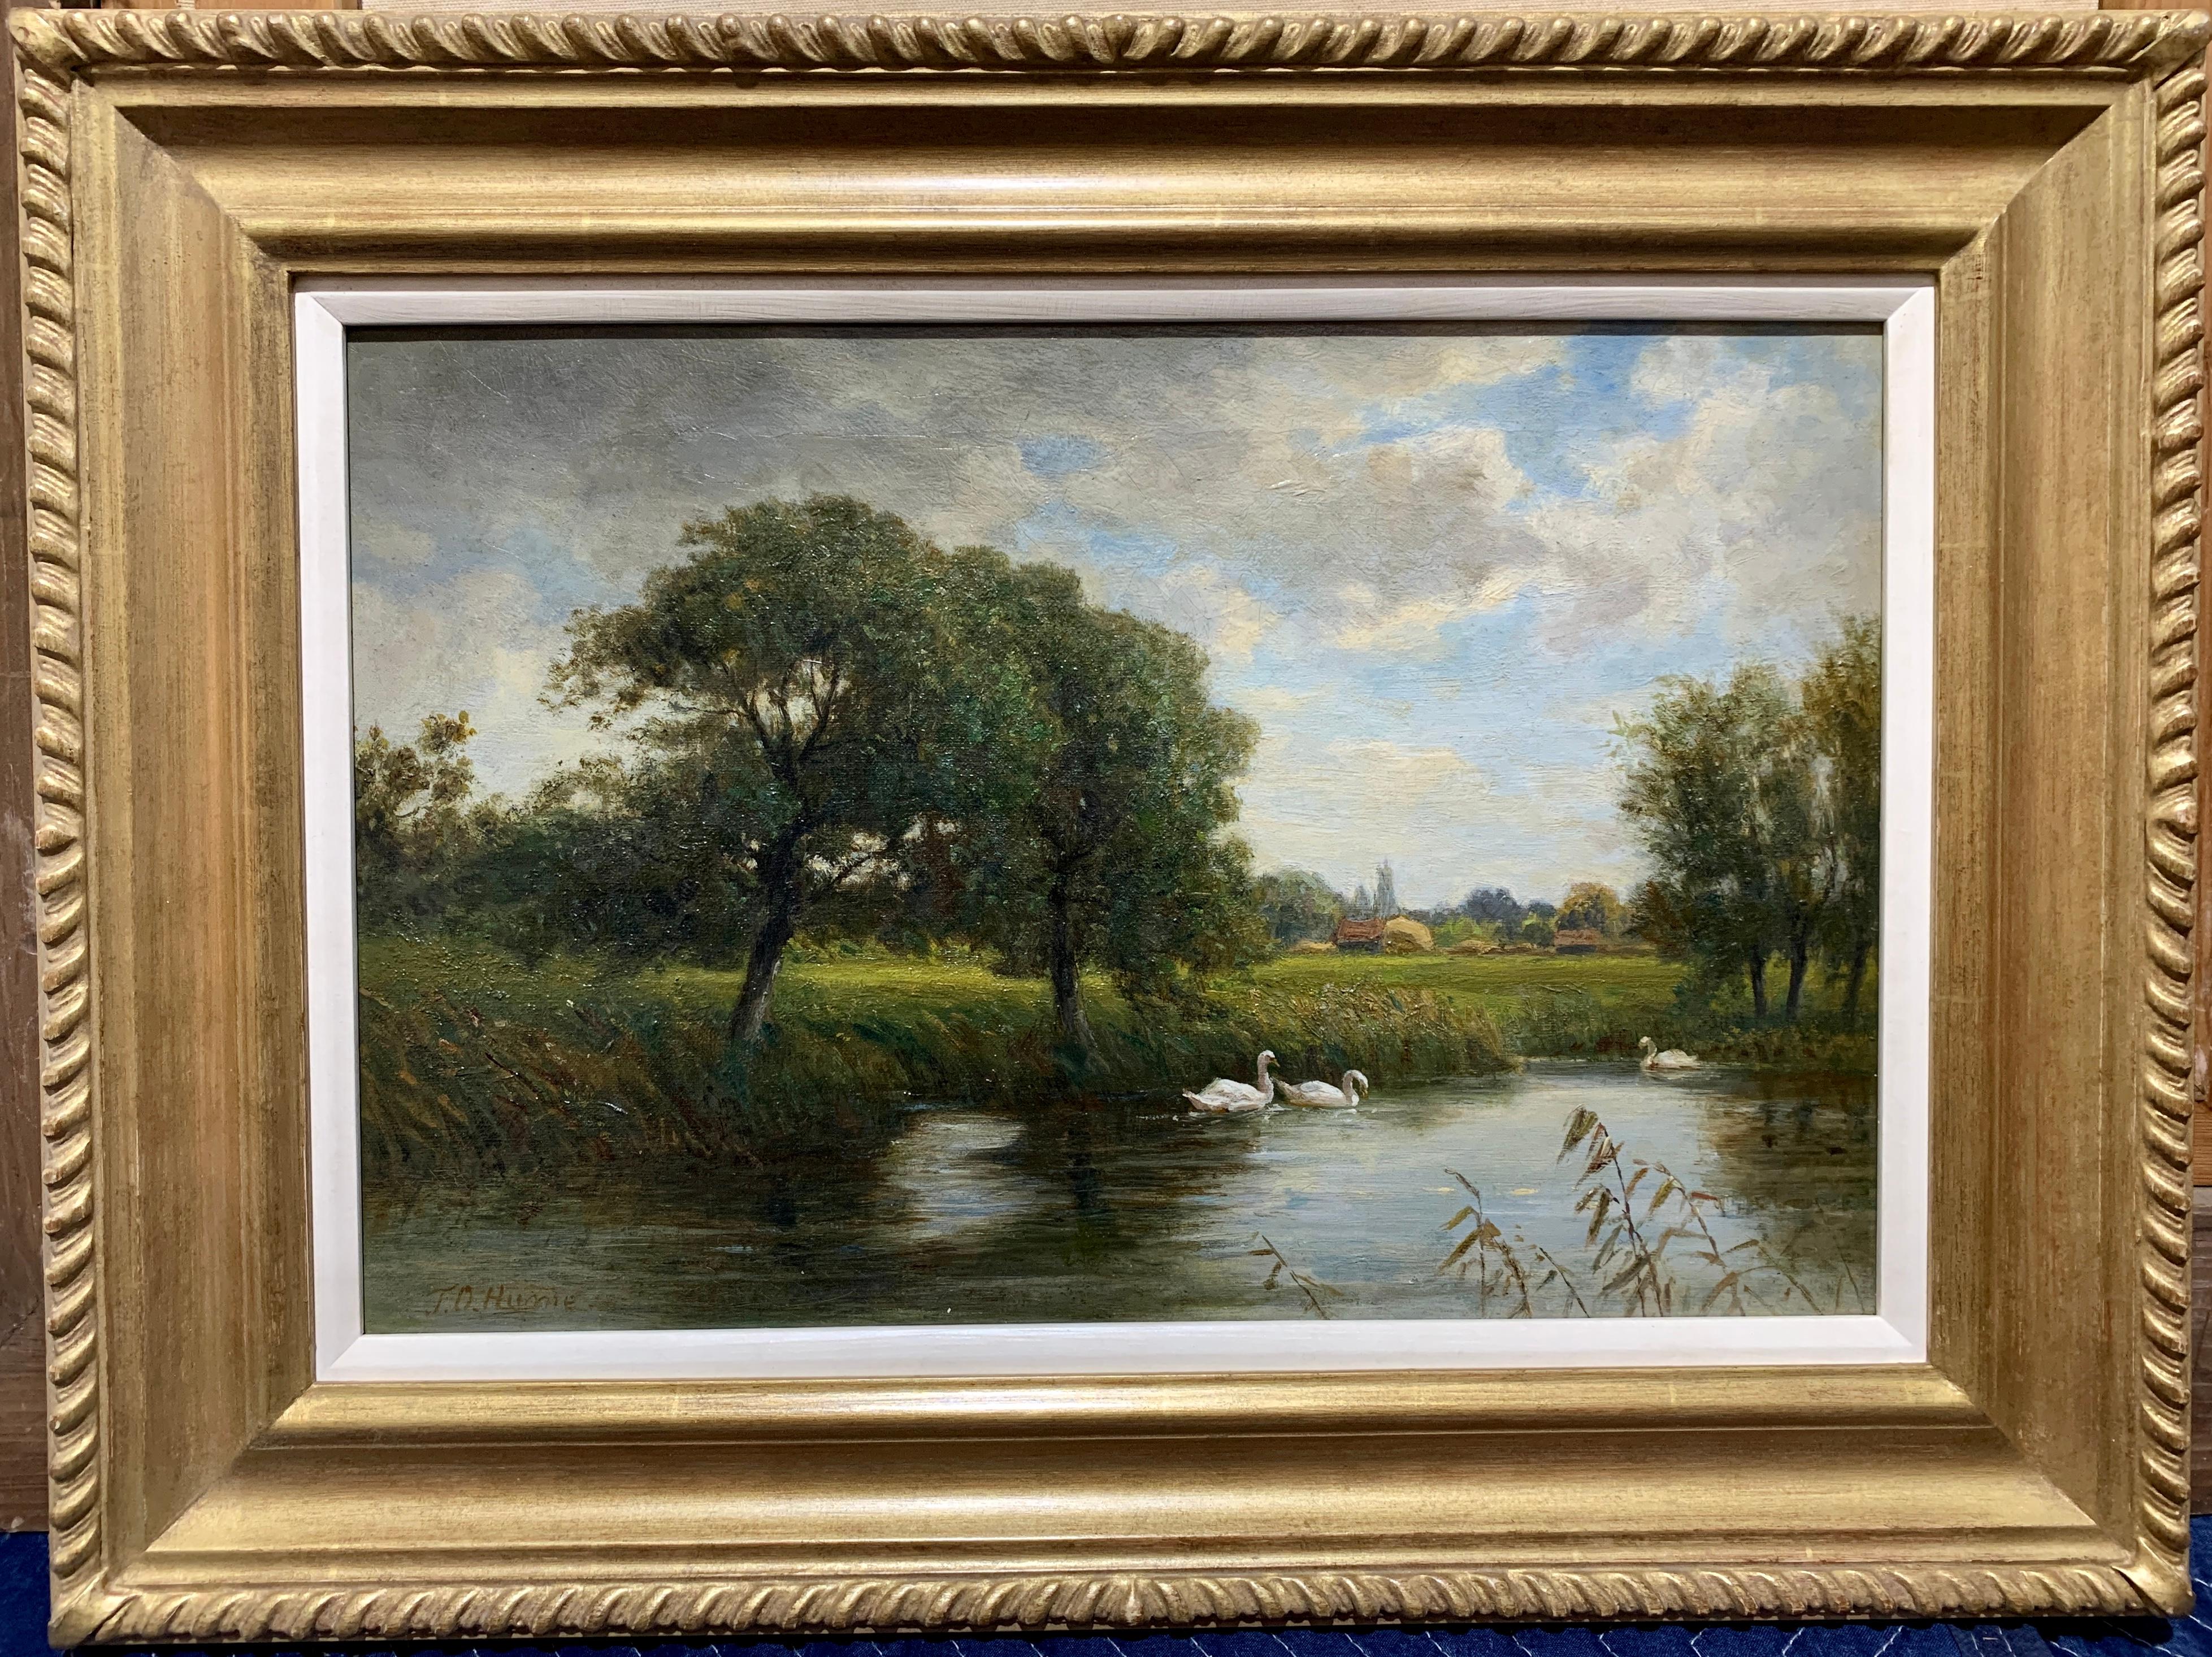 Victorian English 19th century Summer River landscape with Swans during harvest 